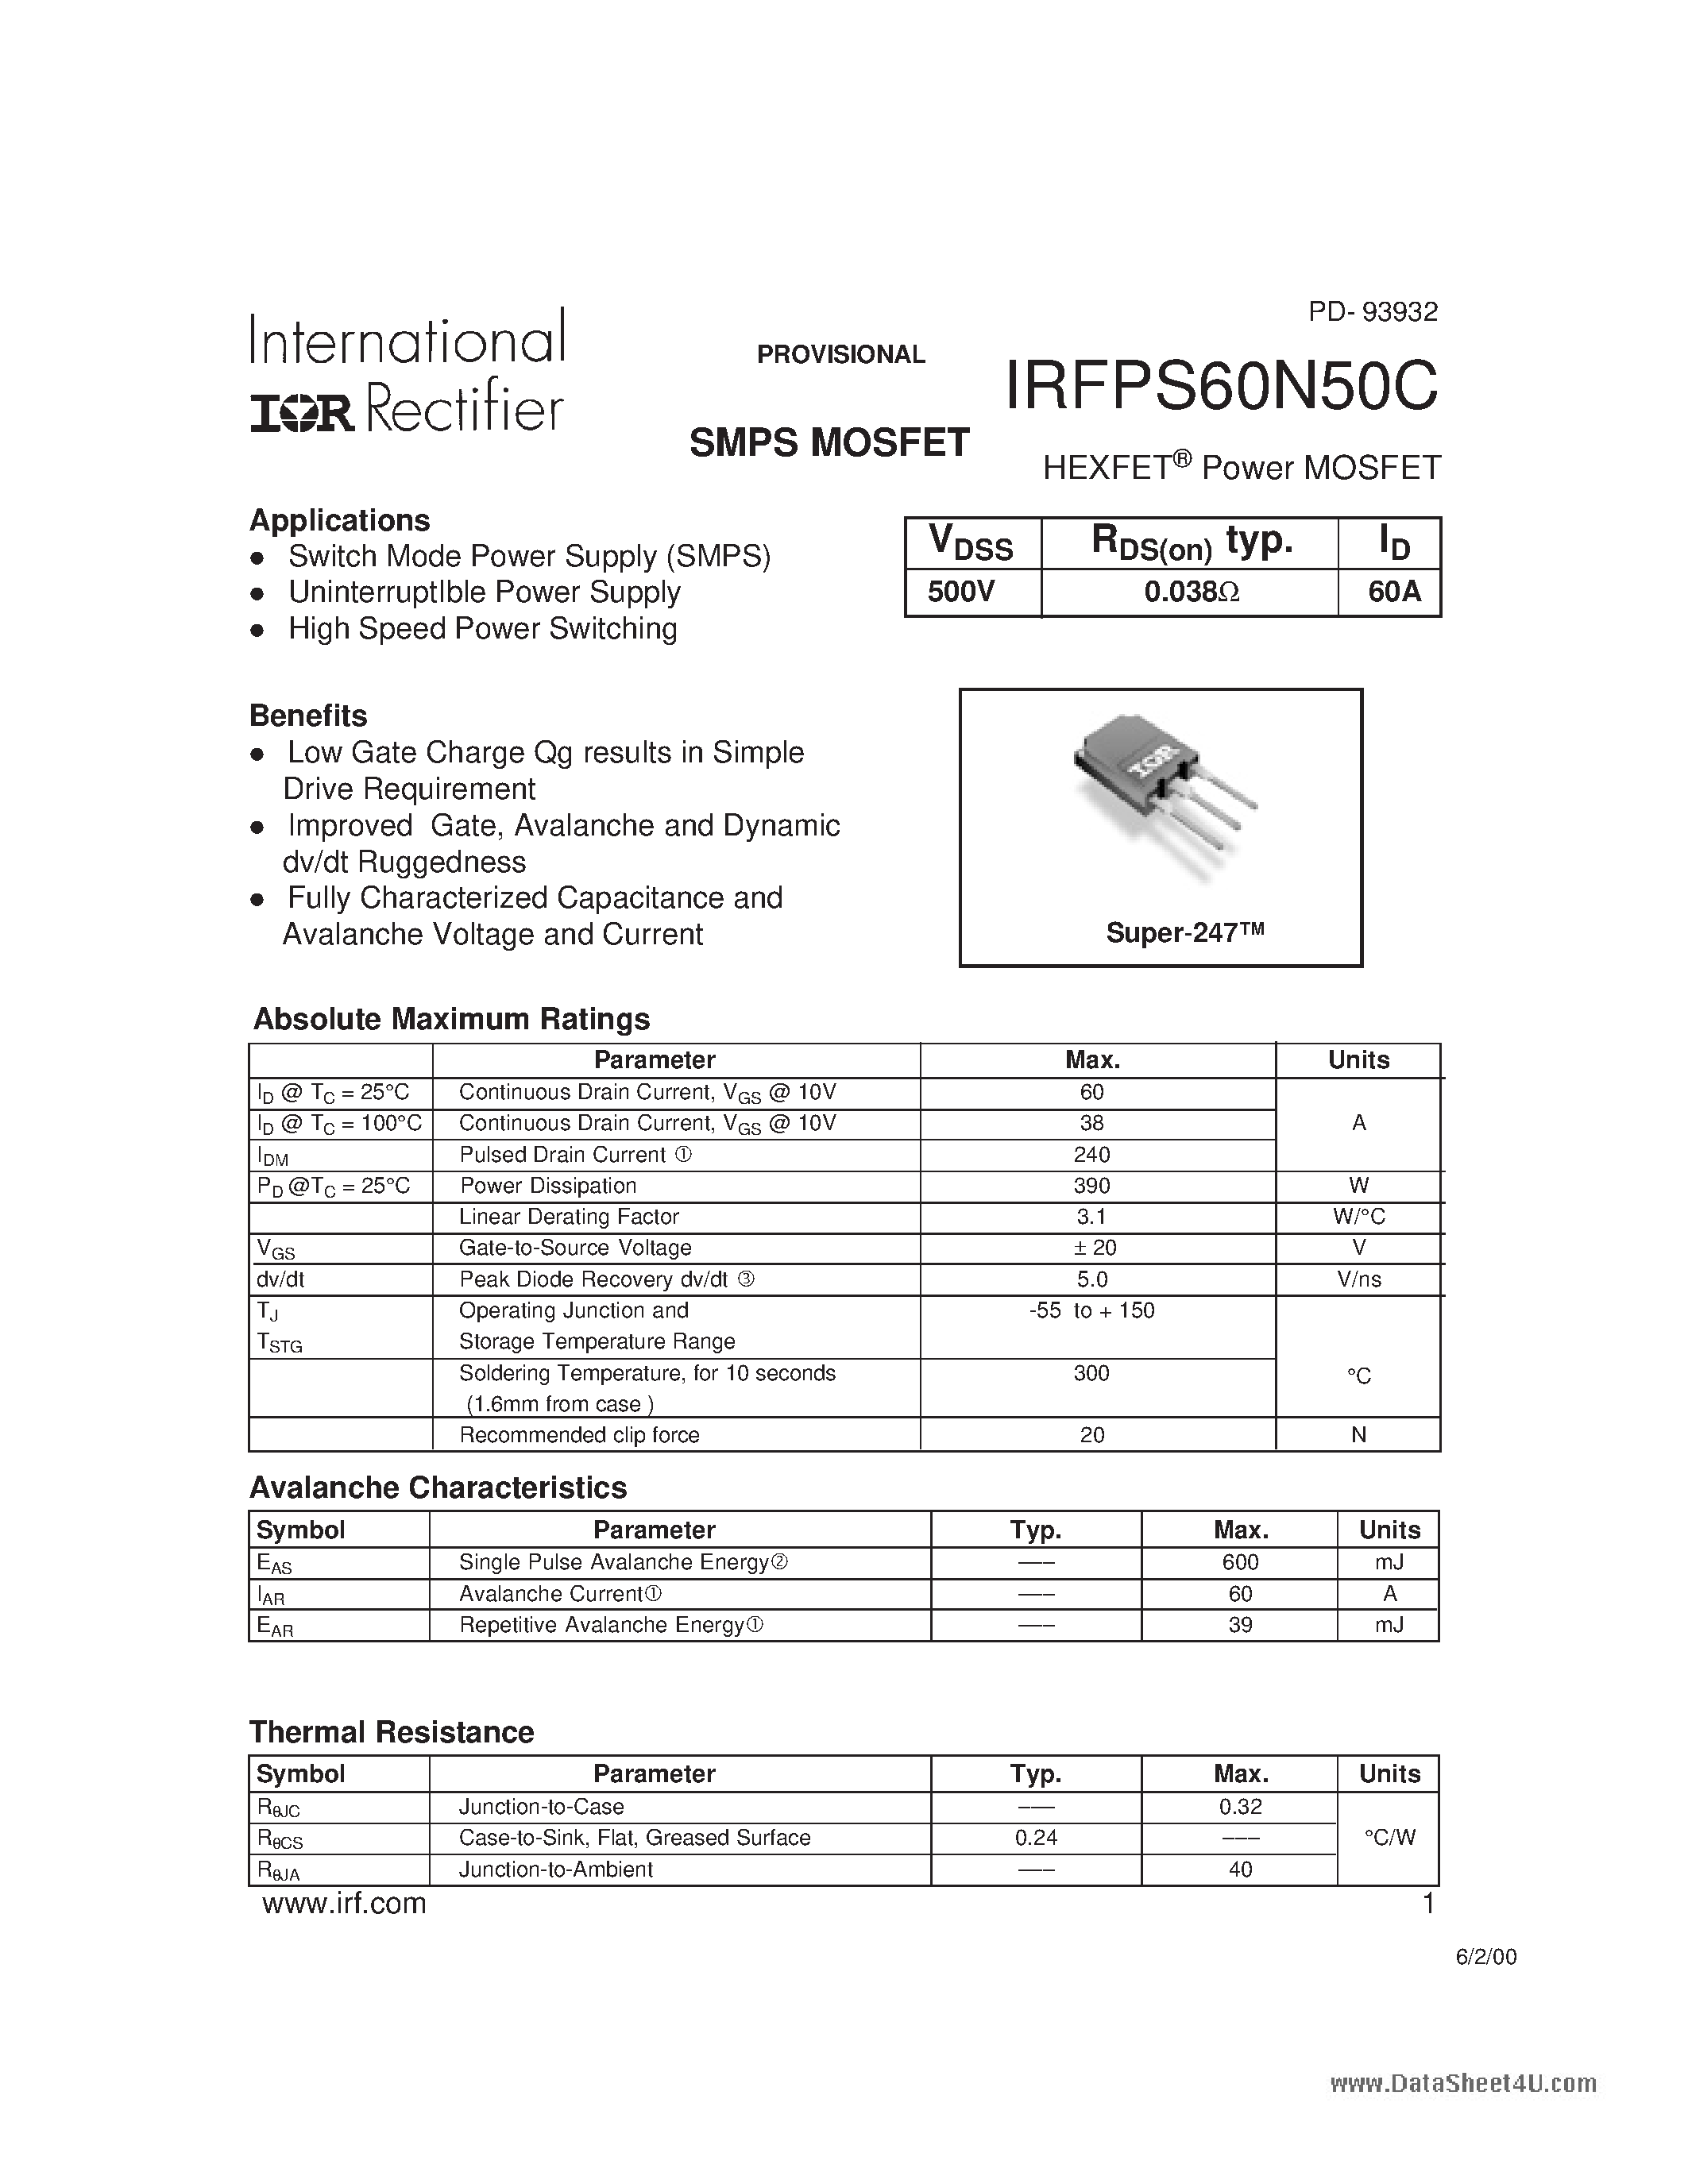 Даташит IRFPS60N50C - HEXFET Power MOSFET страница 1